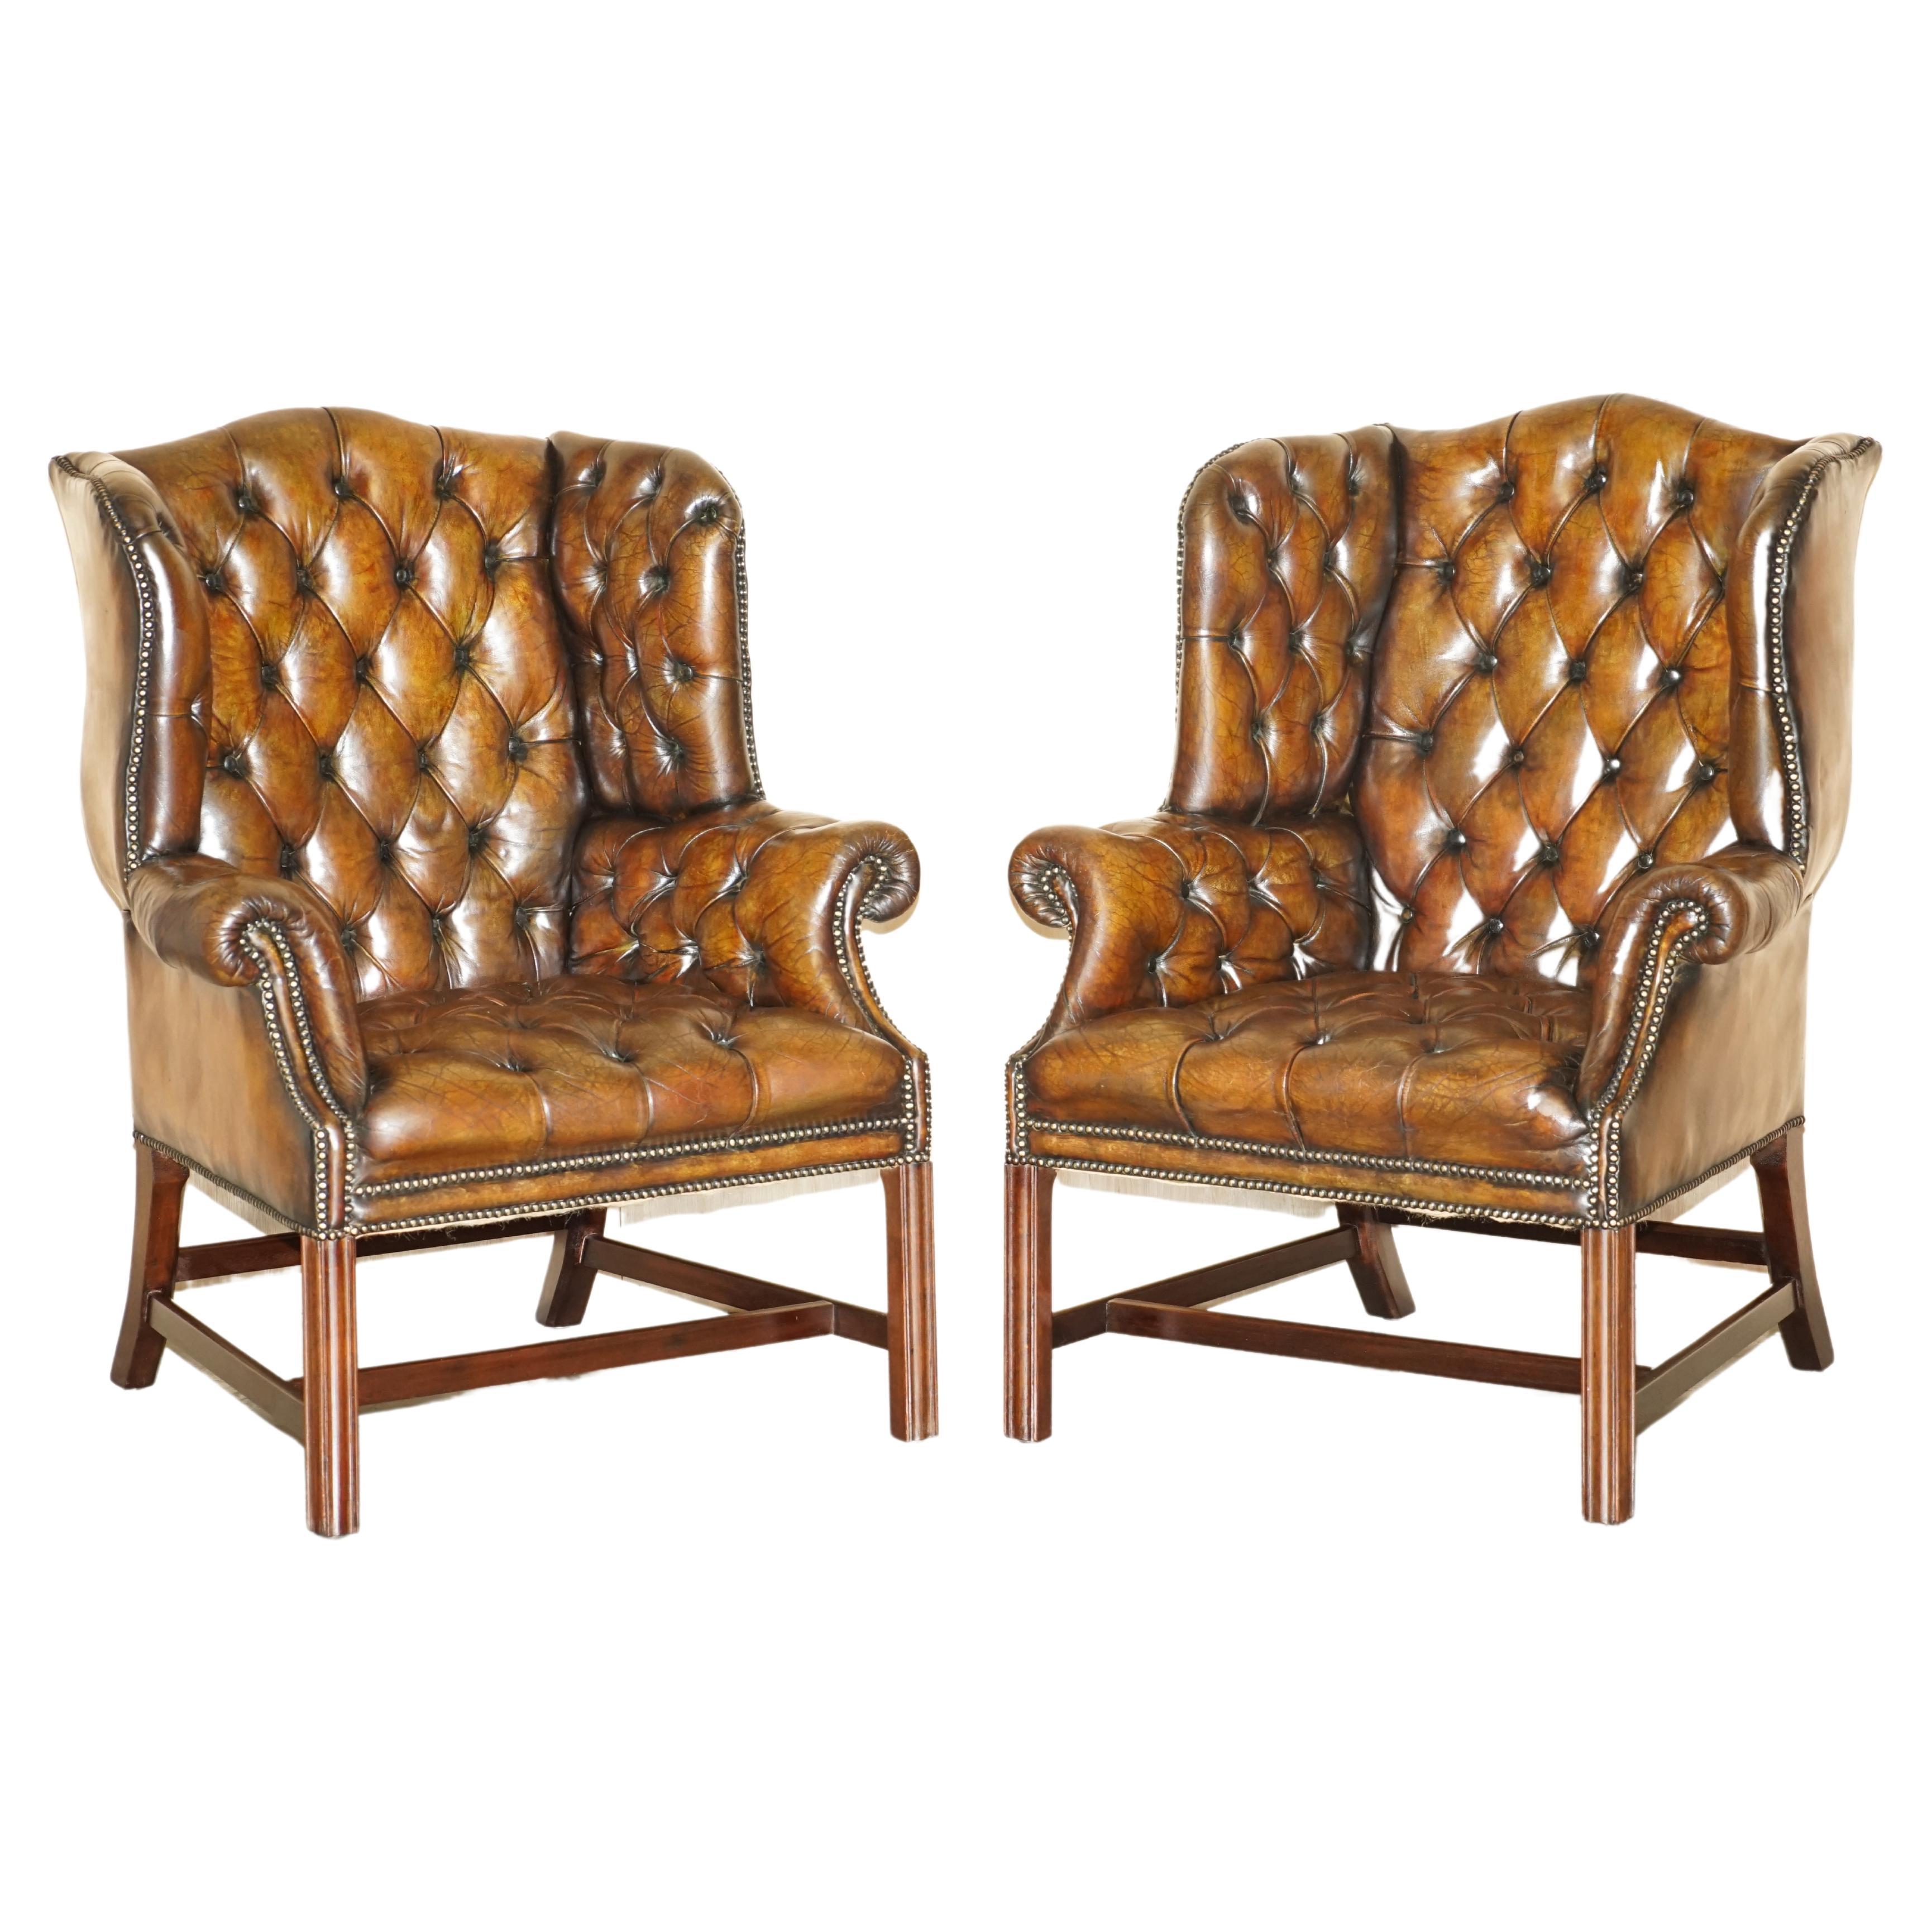 FULLY RESTORED PAIR OF HAND DYED BROWN LEATHER CHESTERFiELD WINGBACK ARMCHAIRS For Sale